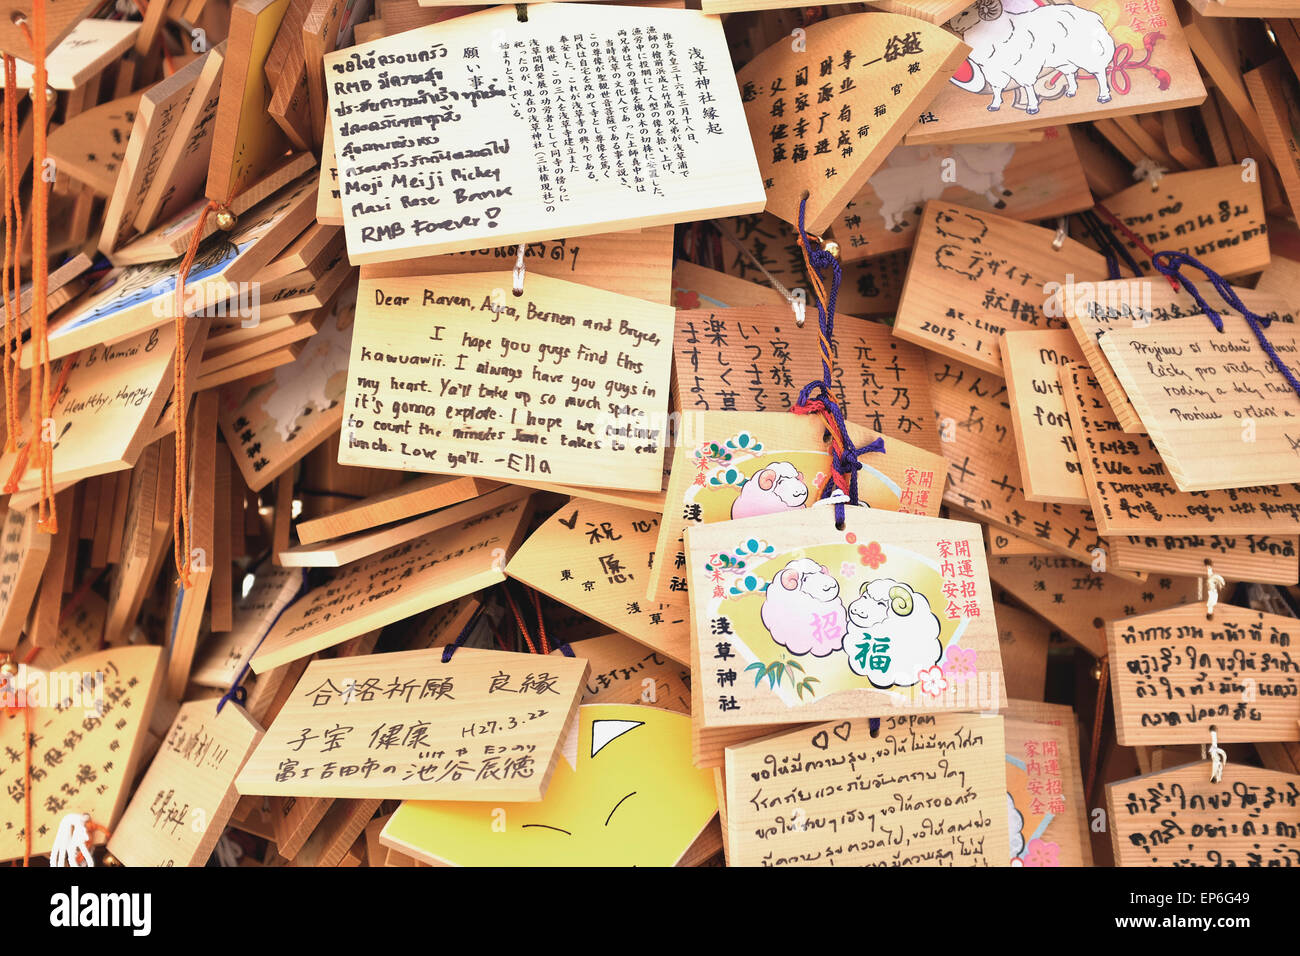 Offered Emas, Wooden wishing plaques at Sensoji Temple Stock Photo